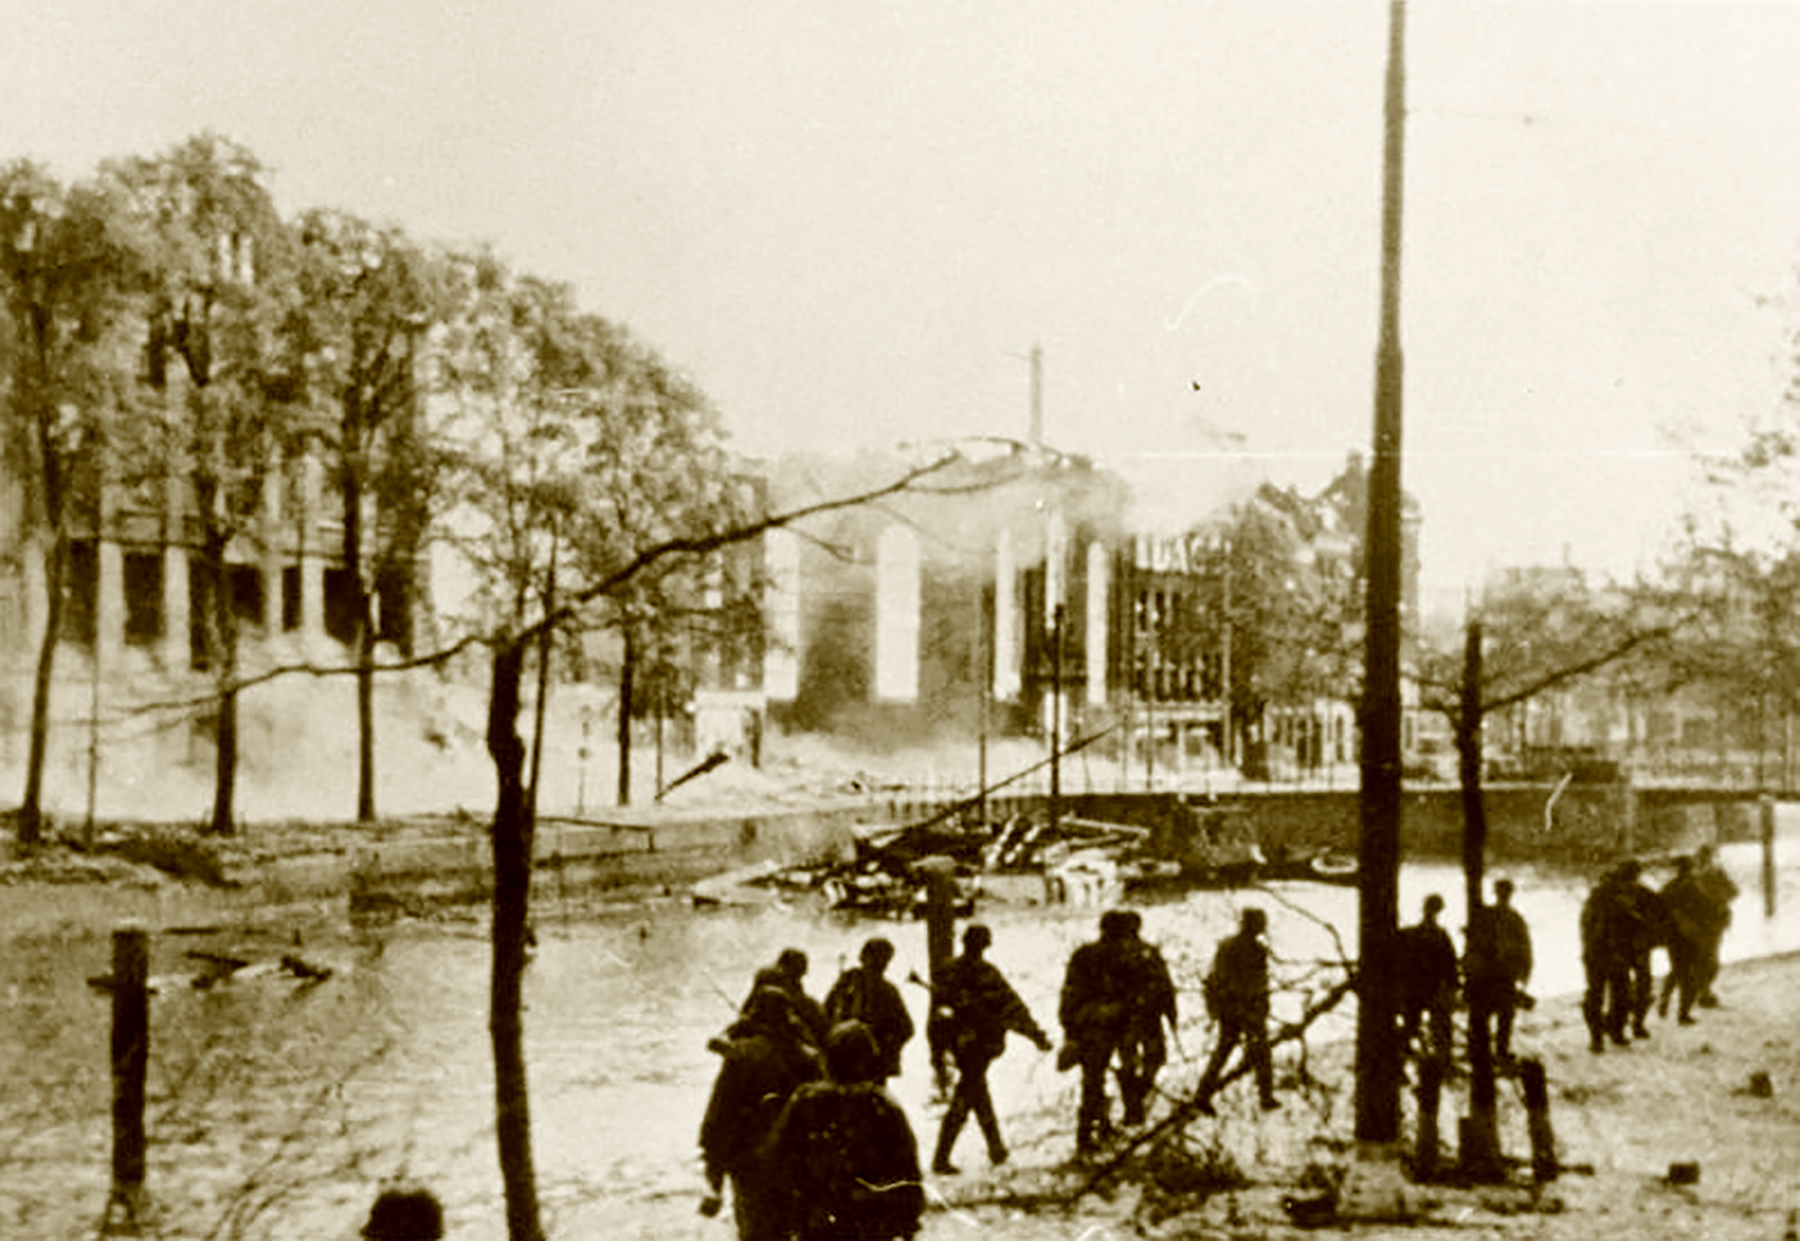 Fall Gelb German troops advance through a destroyed section of Rotterdam Holland May 1940 Bund 01